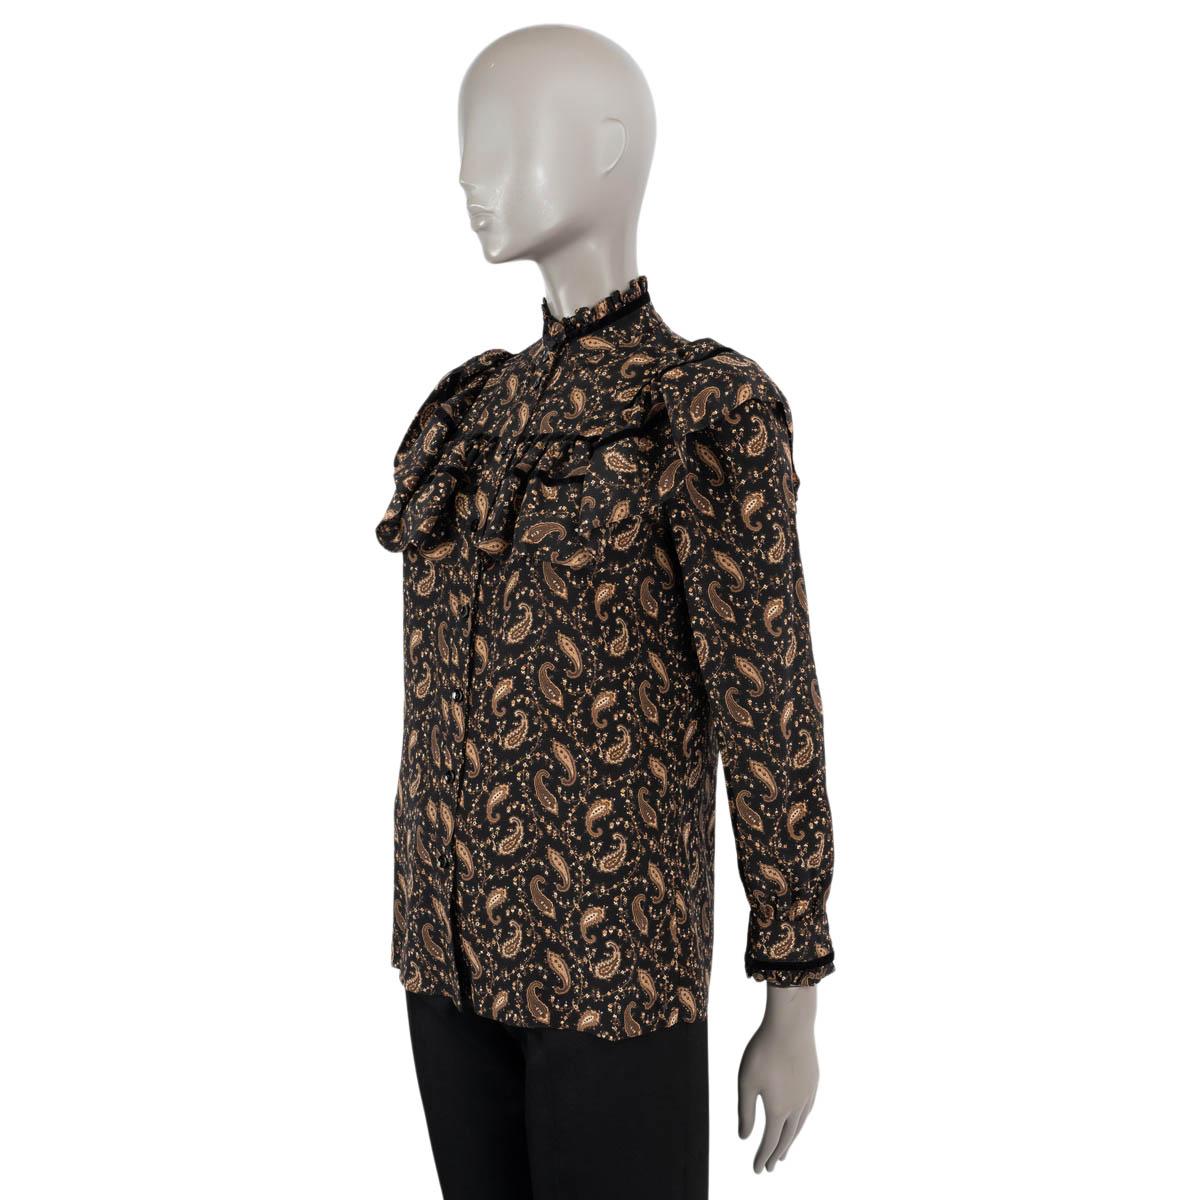 SAINT LAURENT black & brown silk 2016 RUFFLED PAISLEY CREPE Shirt 38 S In Excellent Condition For Sale In Zürich, CH